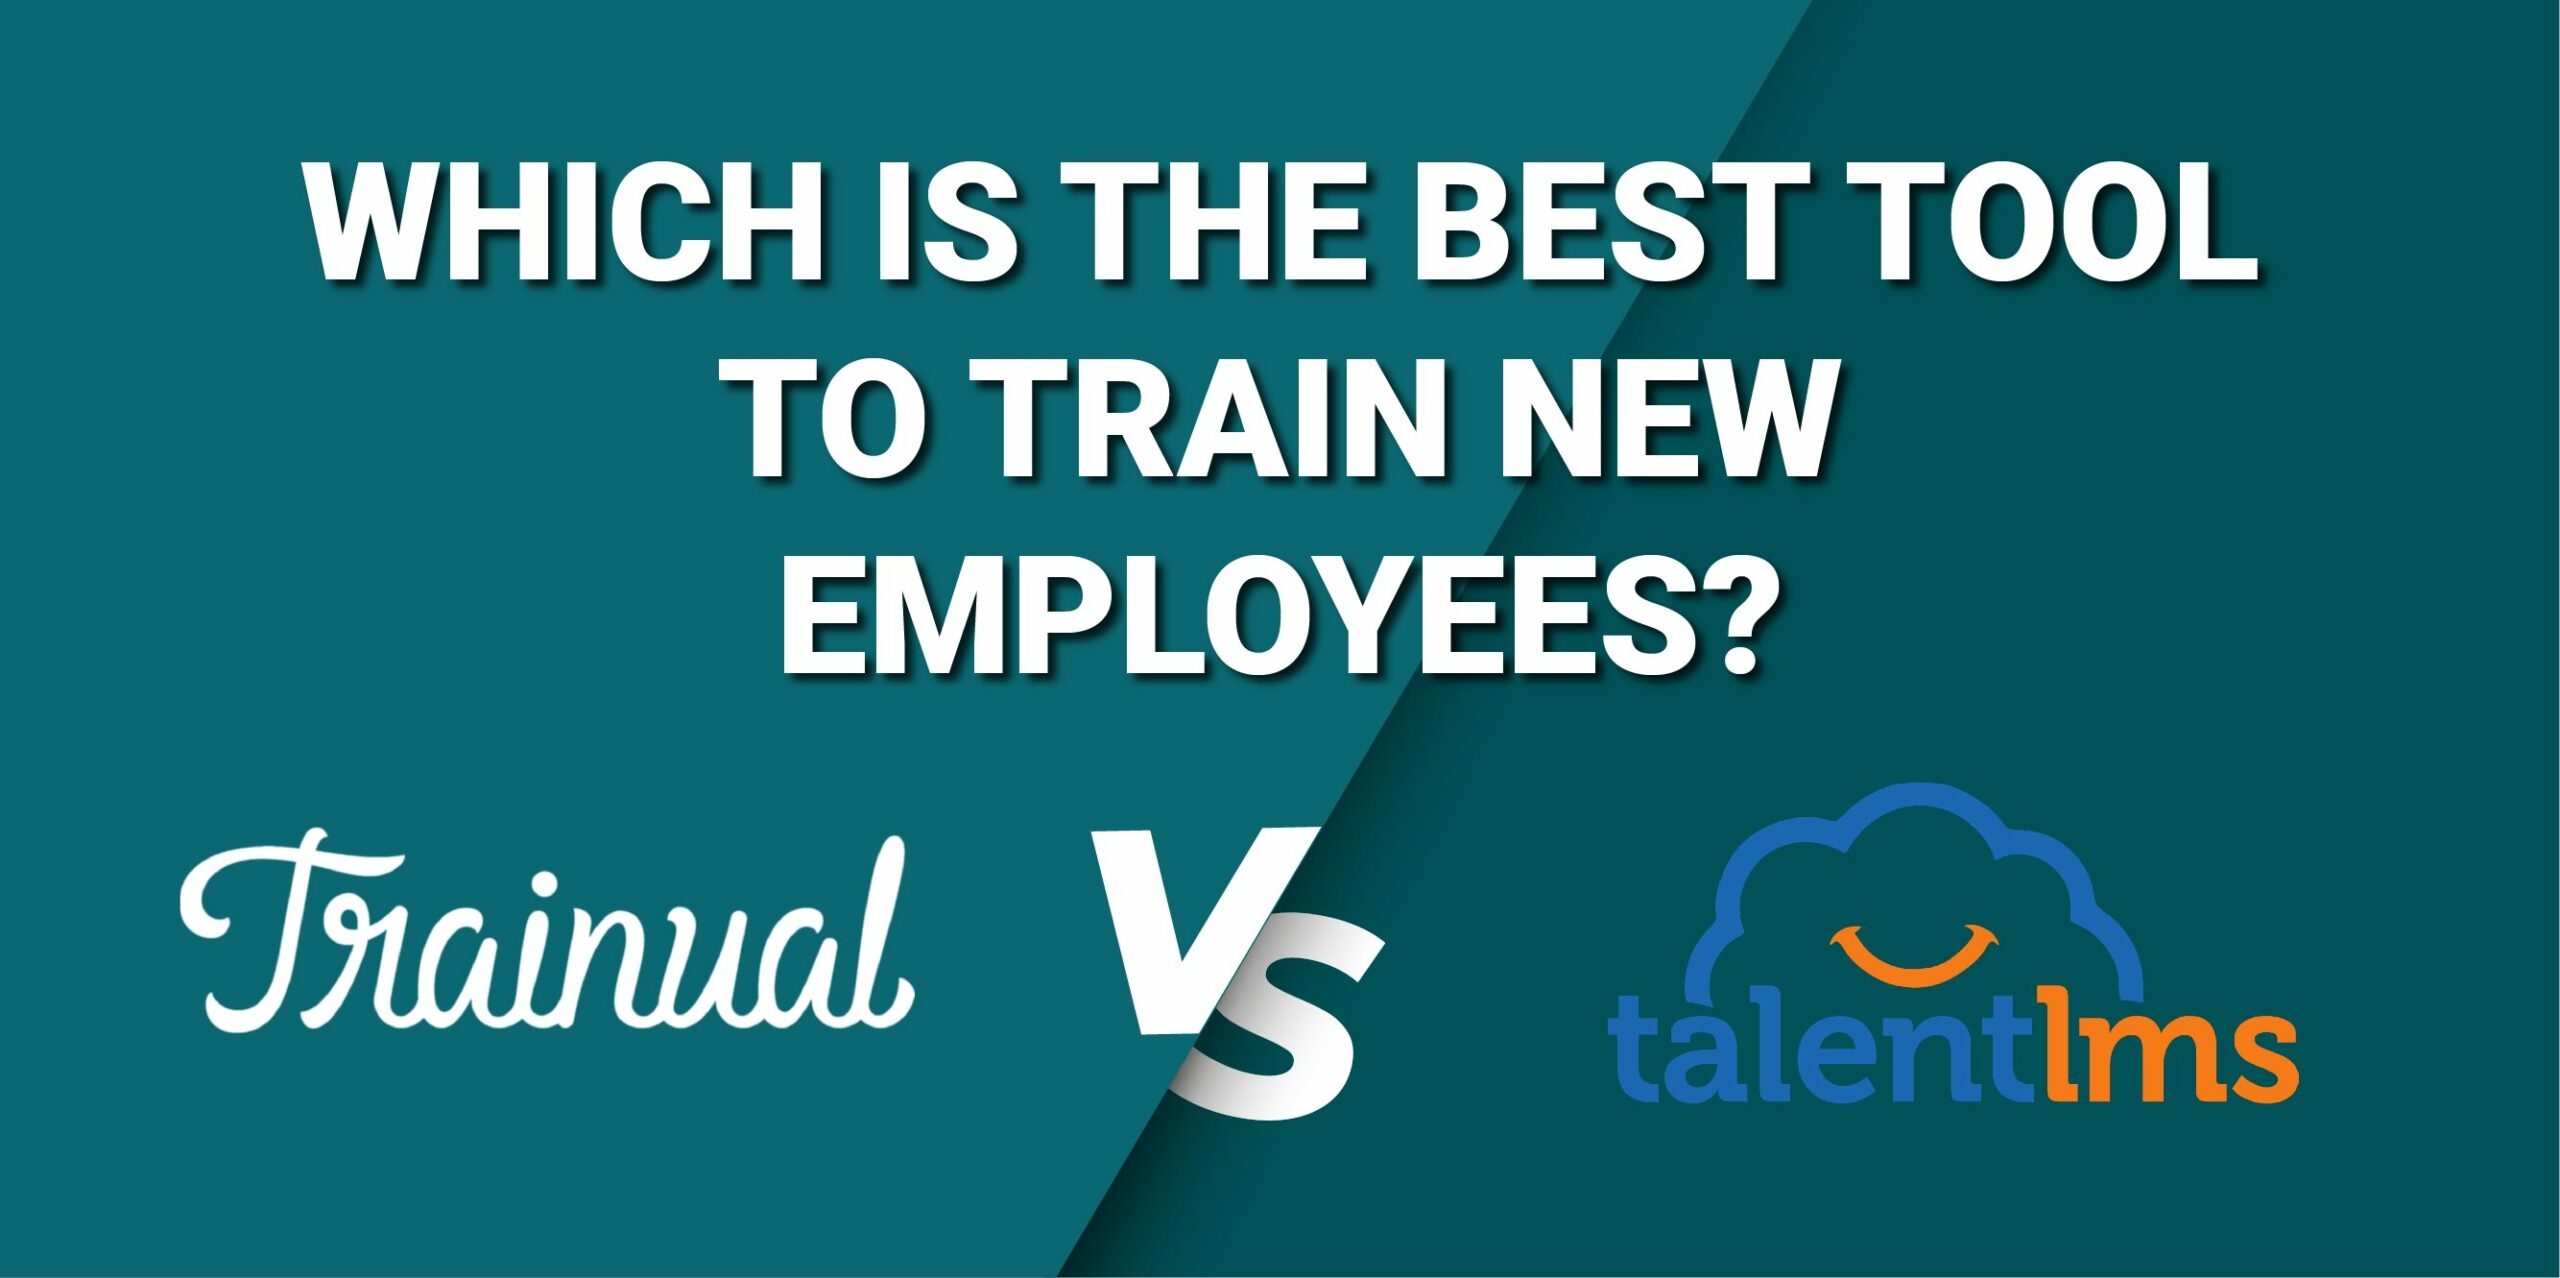 Which is the Best Tool to Train New Employees?